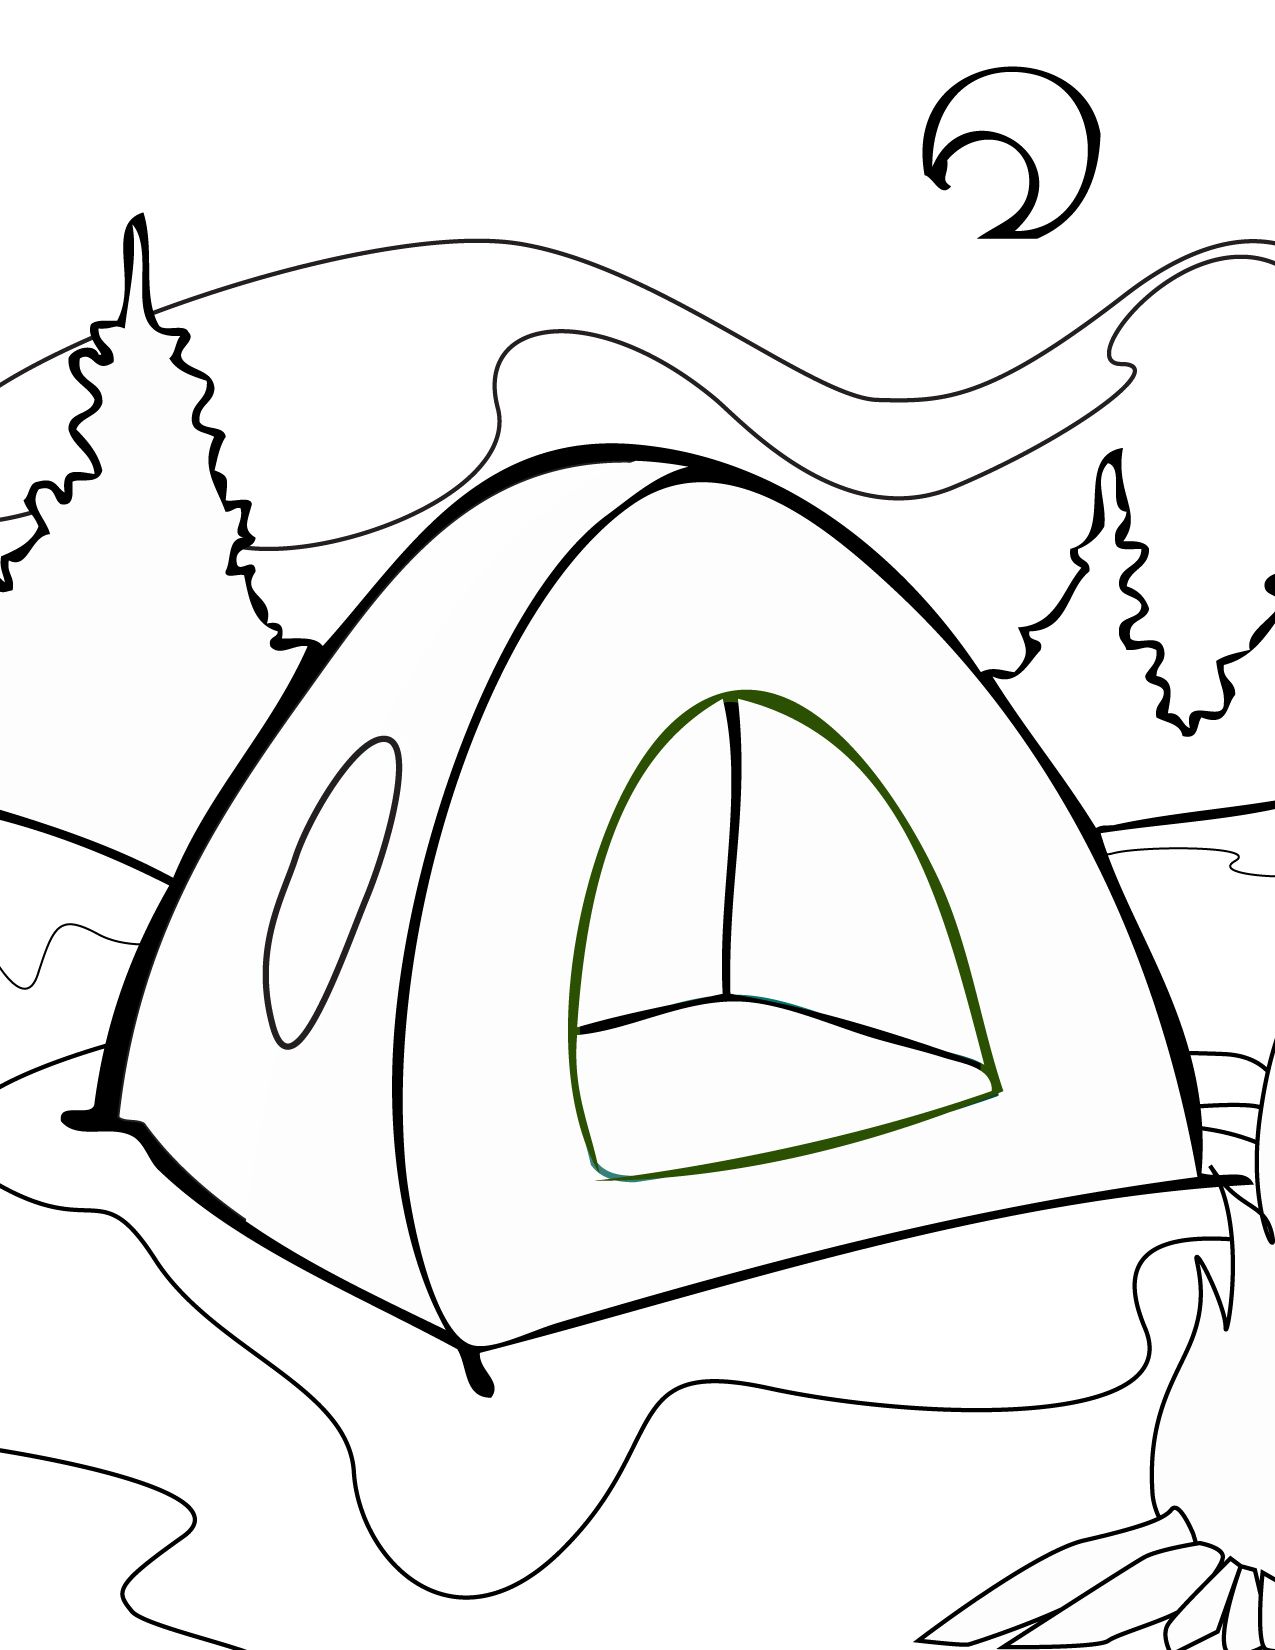 Color your tent.